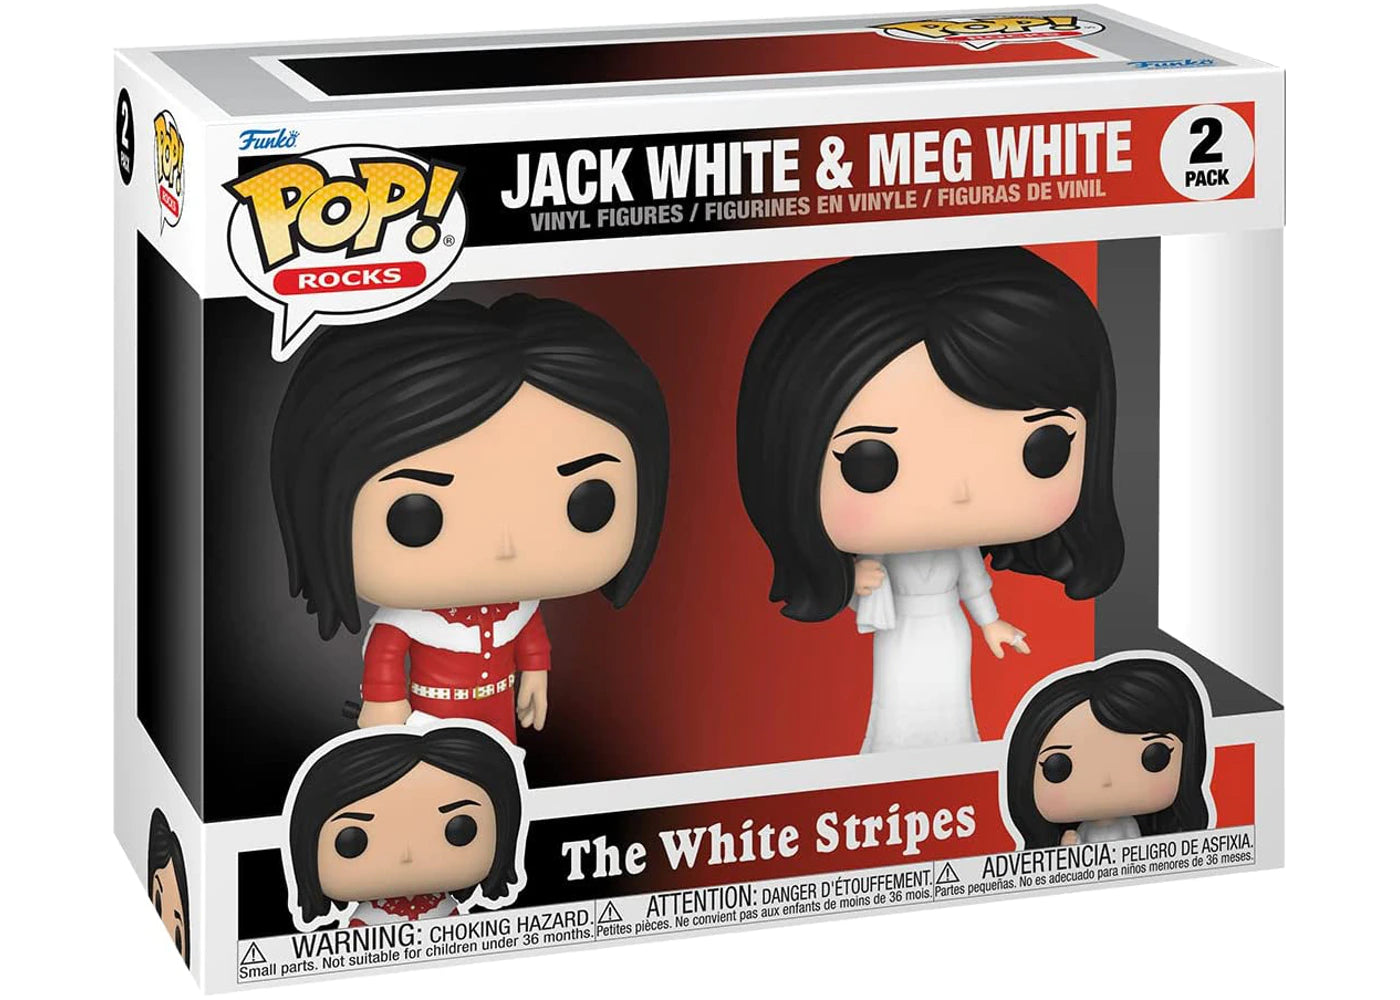 On Hand The White Stripes 2 Pack